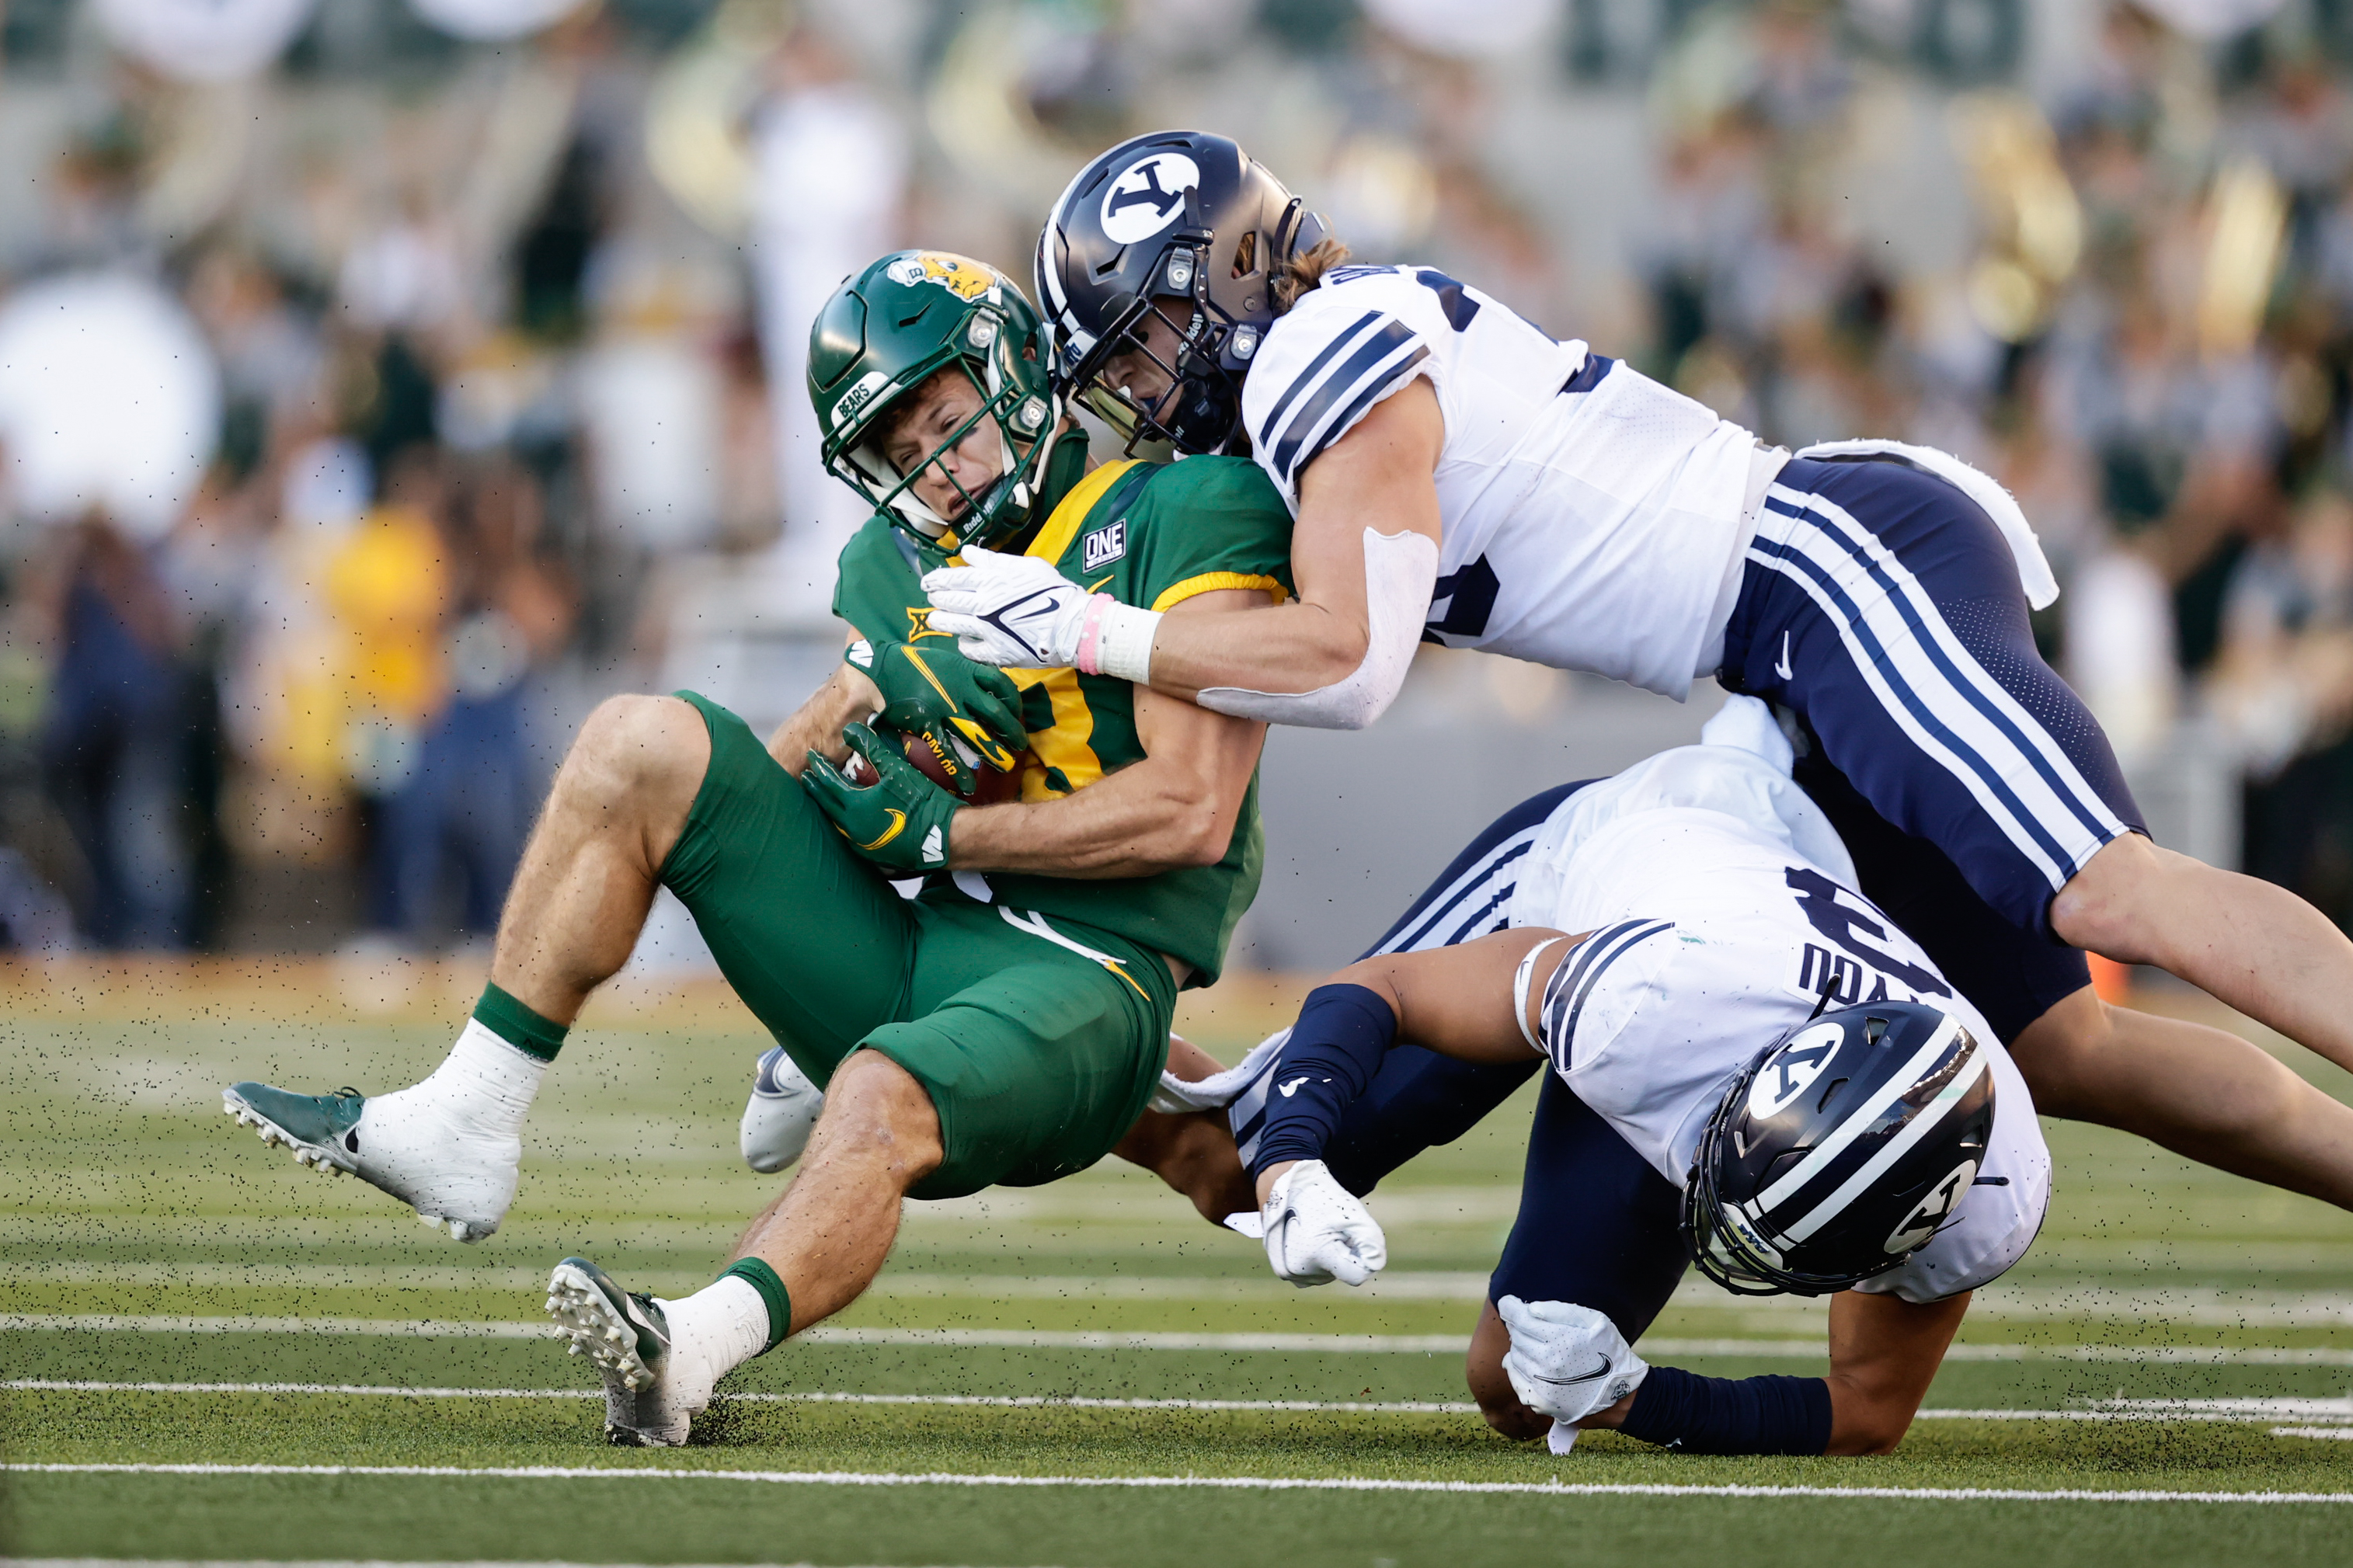 Max Tooley and Ben Bywater make special teams tackle vs. Baylor